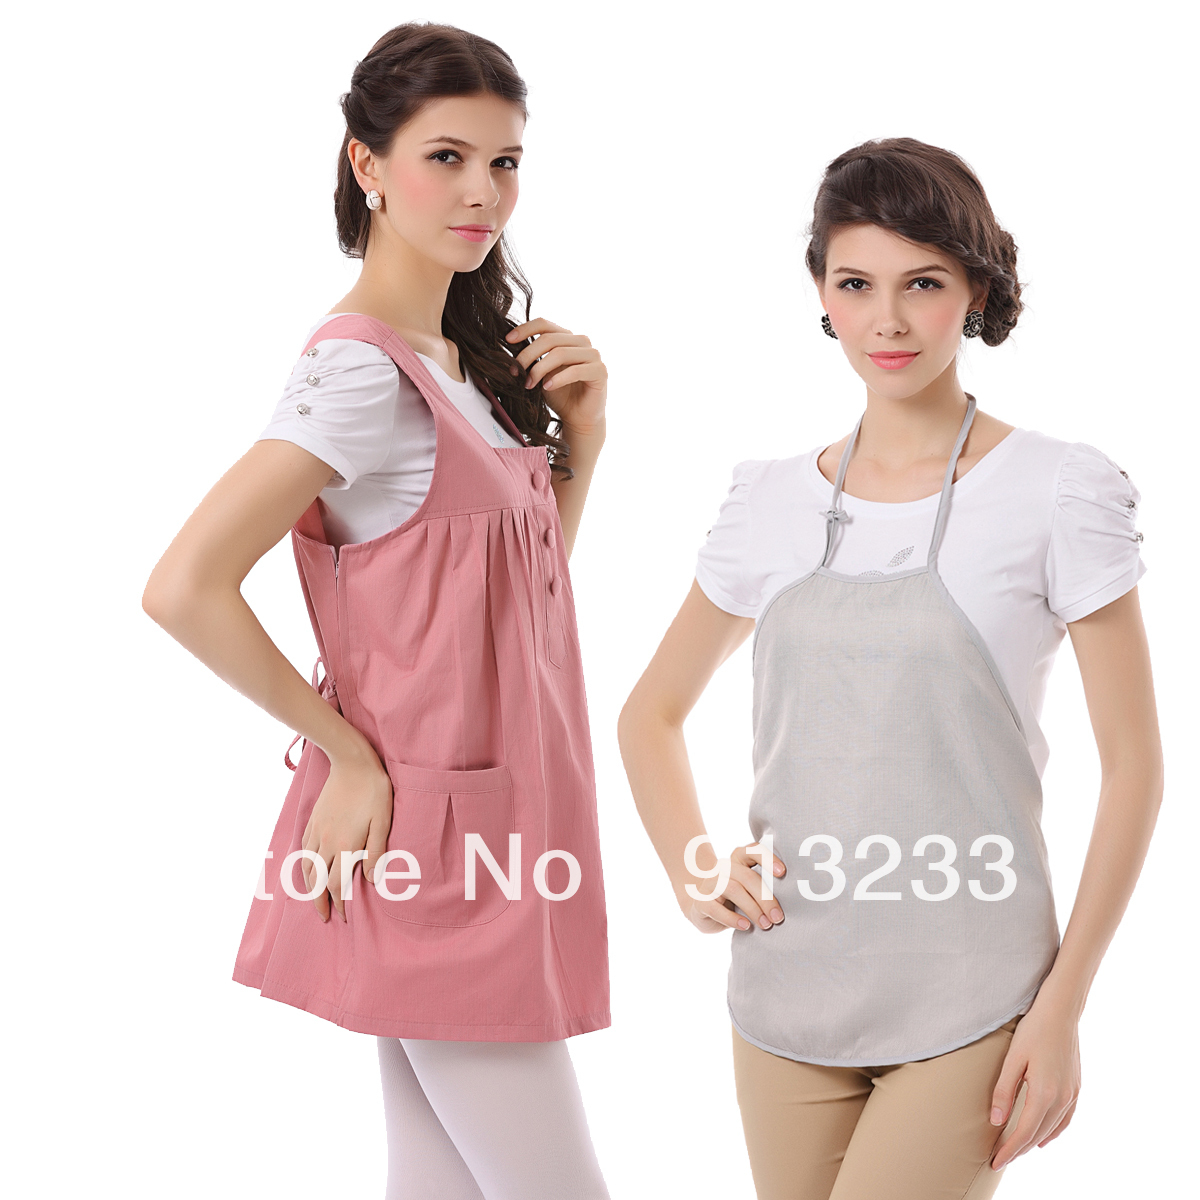 Hot sale free ship 2pcs/set silver fiber radiation-resistant Vest+bellyband for Pregnant protect fetus far away from radiation